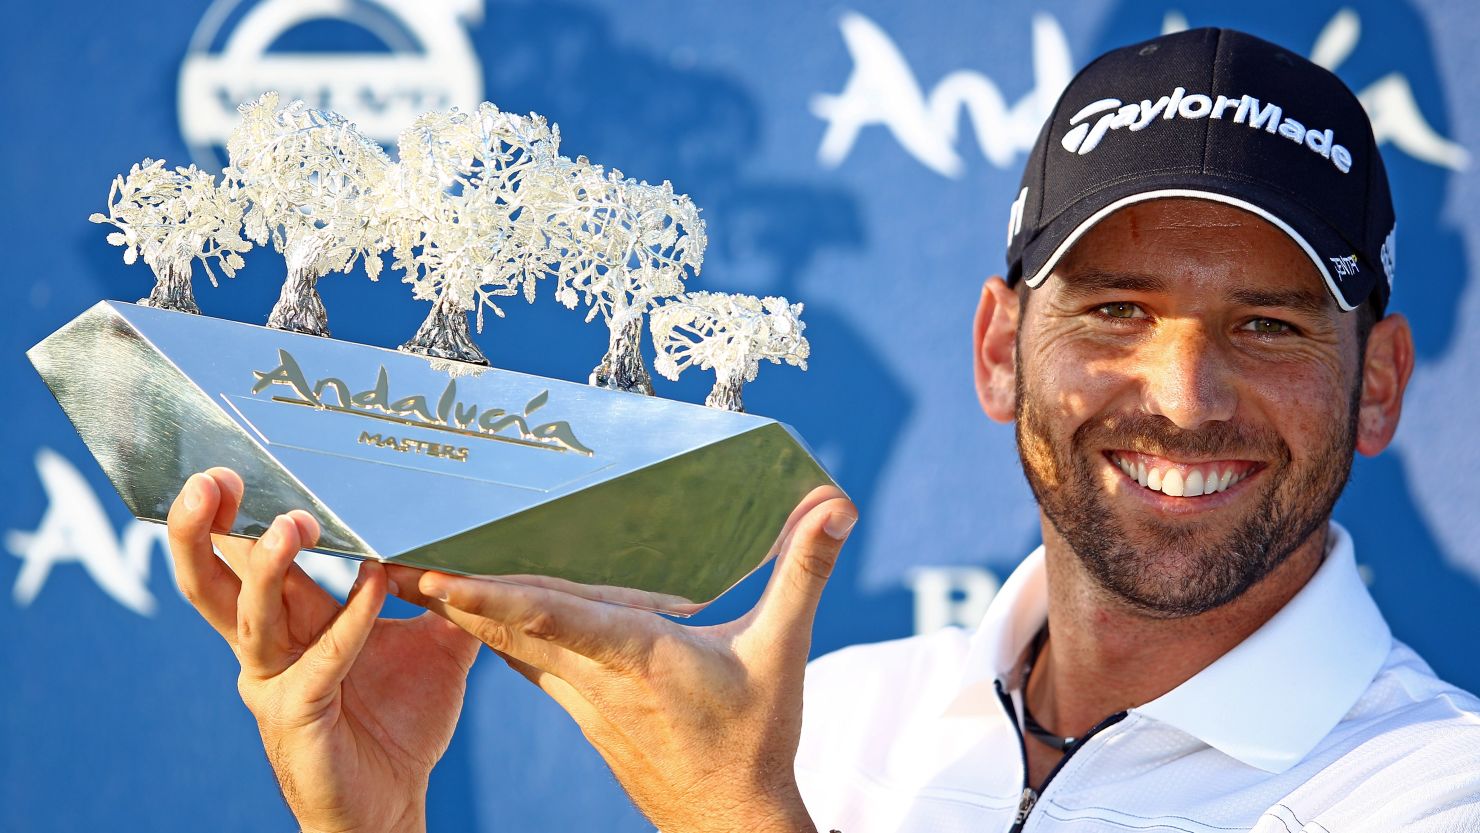 Spain's Sergio Garcia won the Andalucia Masters last year.